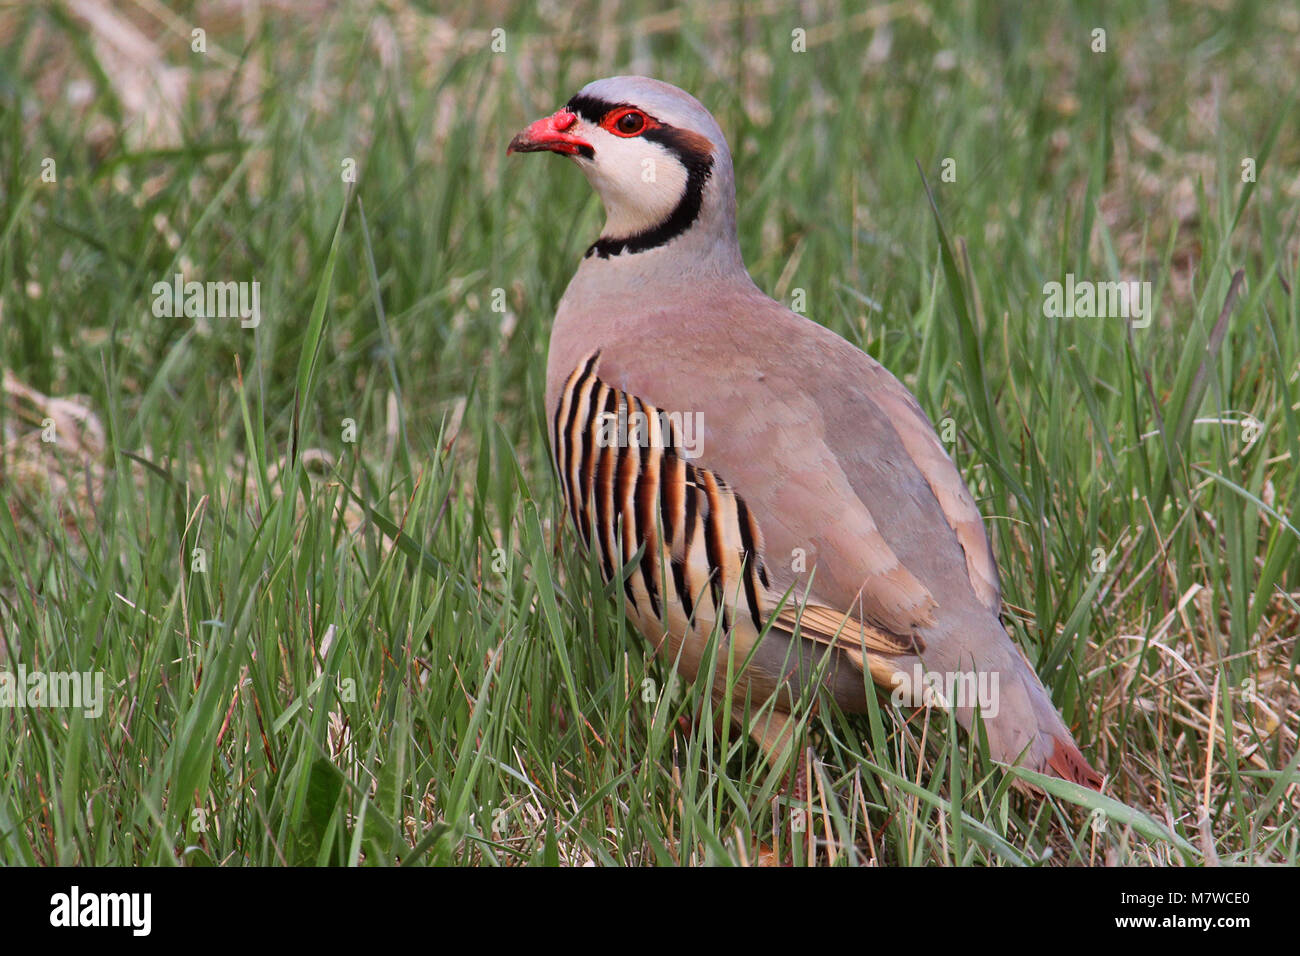 Chukar,  Alectoris chukar; the Chukar was brought as a game bird to North America, where it has thrived in some arid regions of the west. Stock Photo